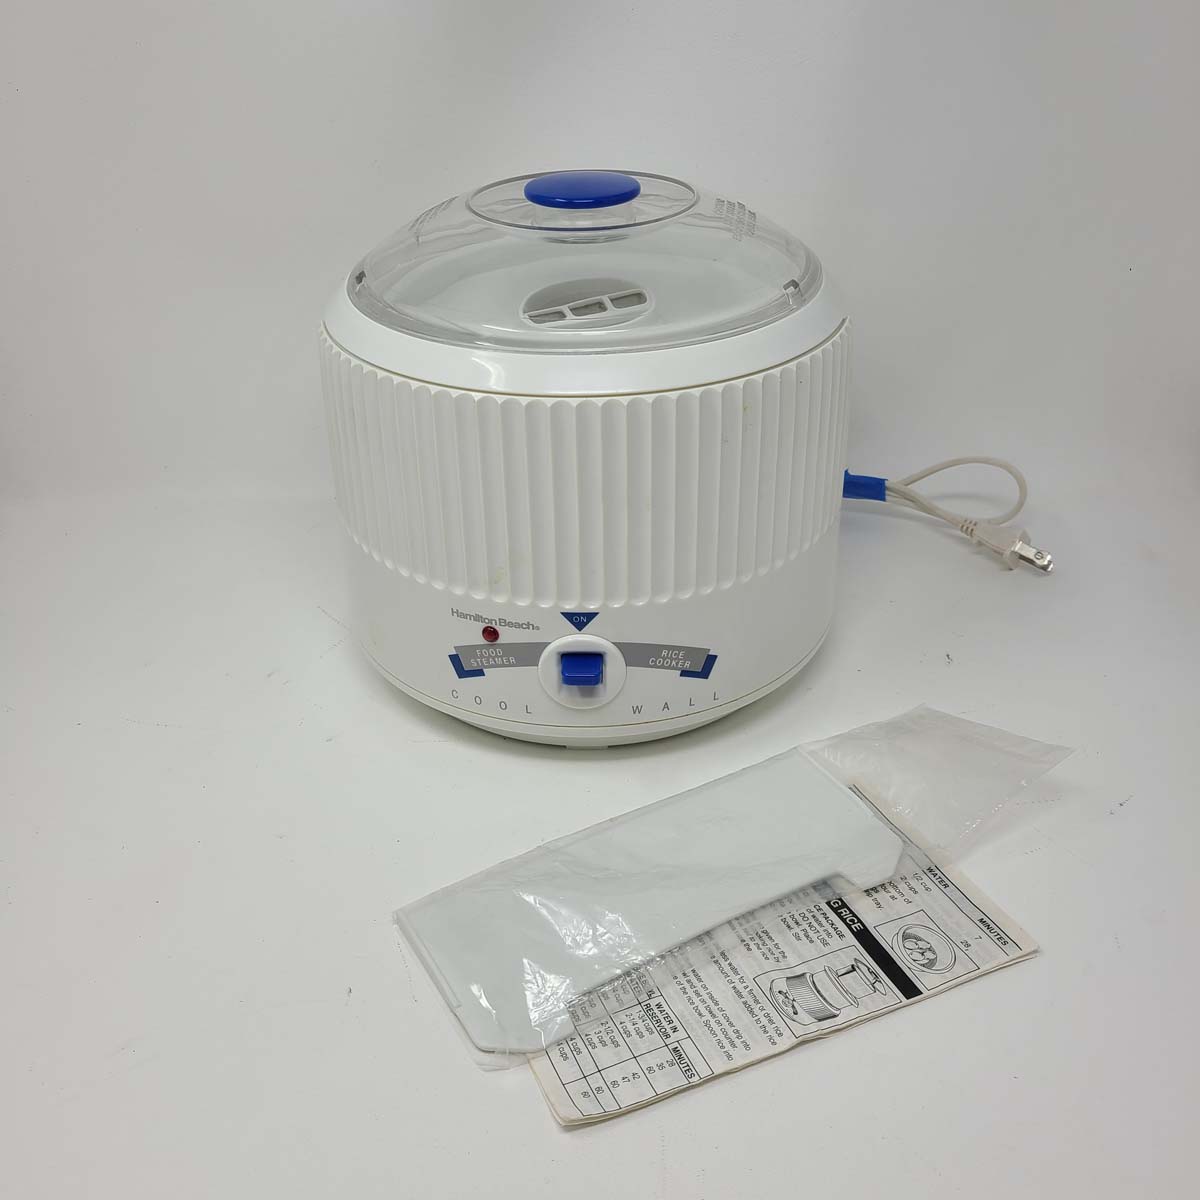 Hamilton Beach Coolwall Food Steamer/Rice Cooker